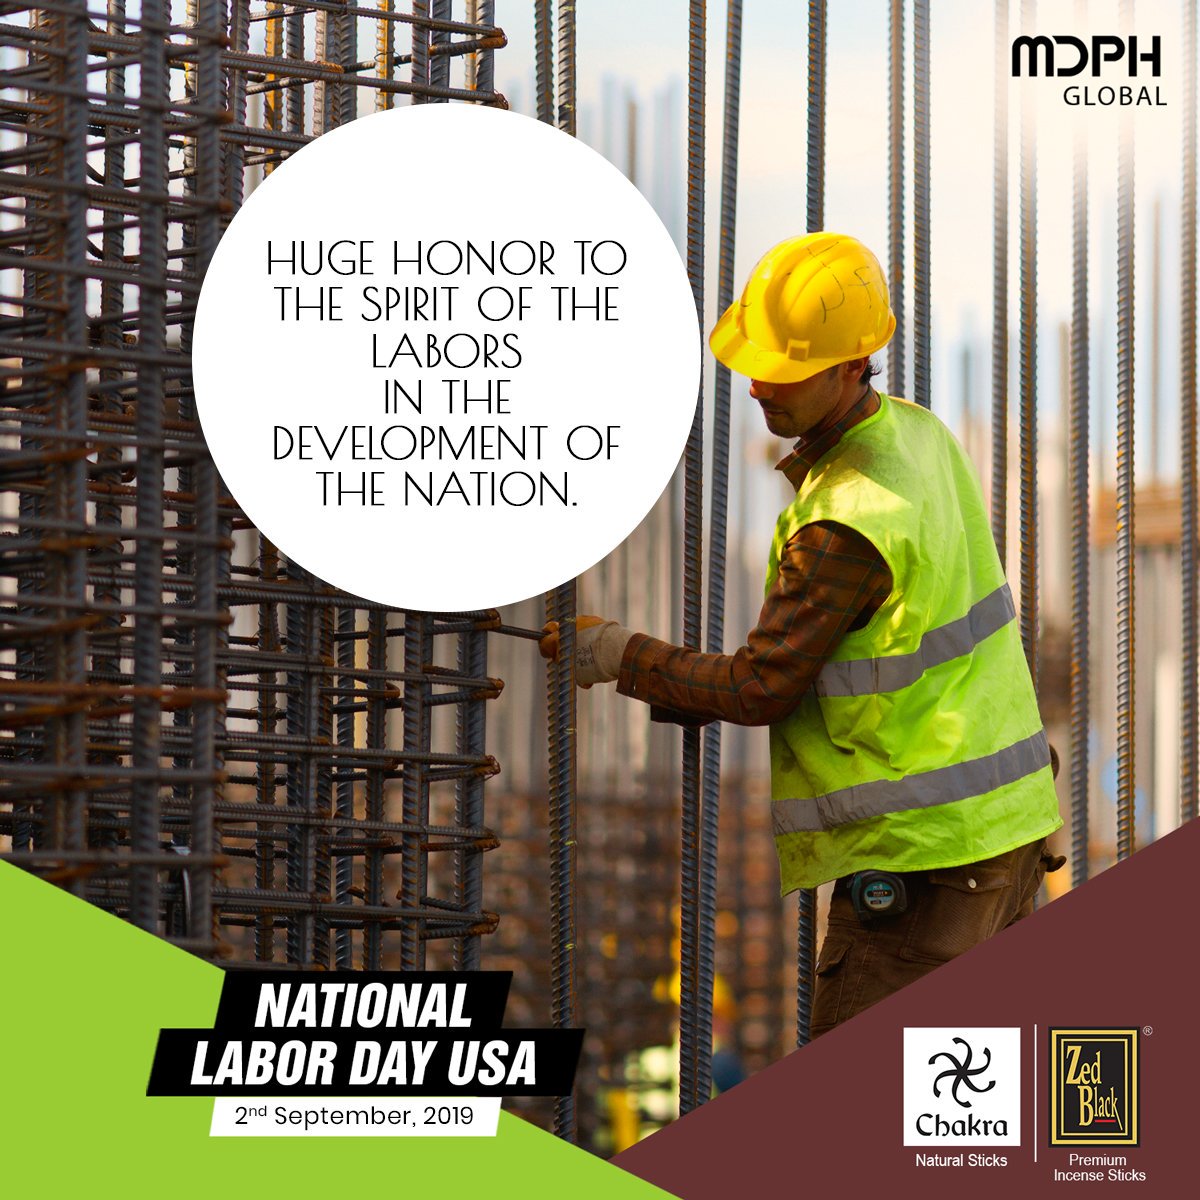 Be thankful to the one whose active participation is to serve for the country. 

#LaborDay #MondayMotivation #Monday #UnitedStates #USA #holiday #celebrate #September #Labor #country #national #MDPHGlobal #ZedBlack #ChakraAroma #IncenseSticks #aroma #chakra #Incense #motivation